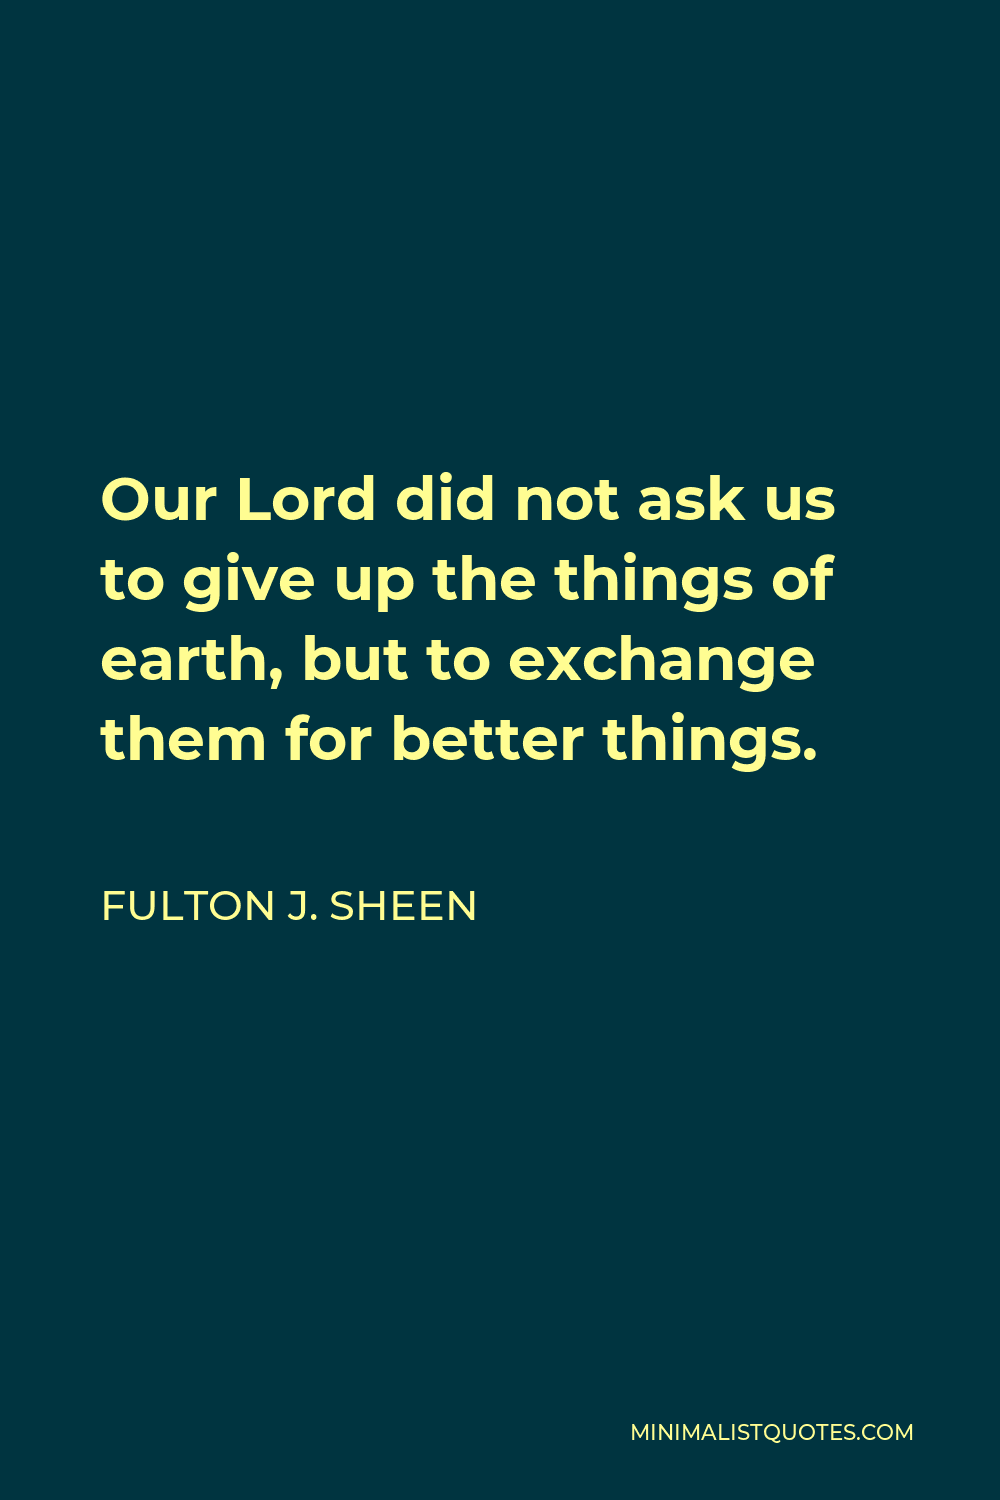 Fulton J. Sheen Quote - Our Lord did not ask us to give up the things of earth, but to exchange them for better things.